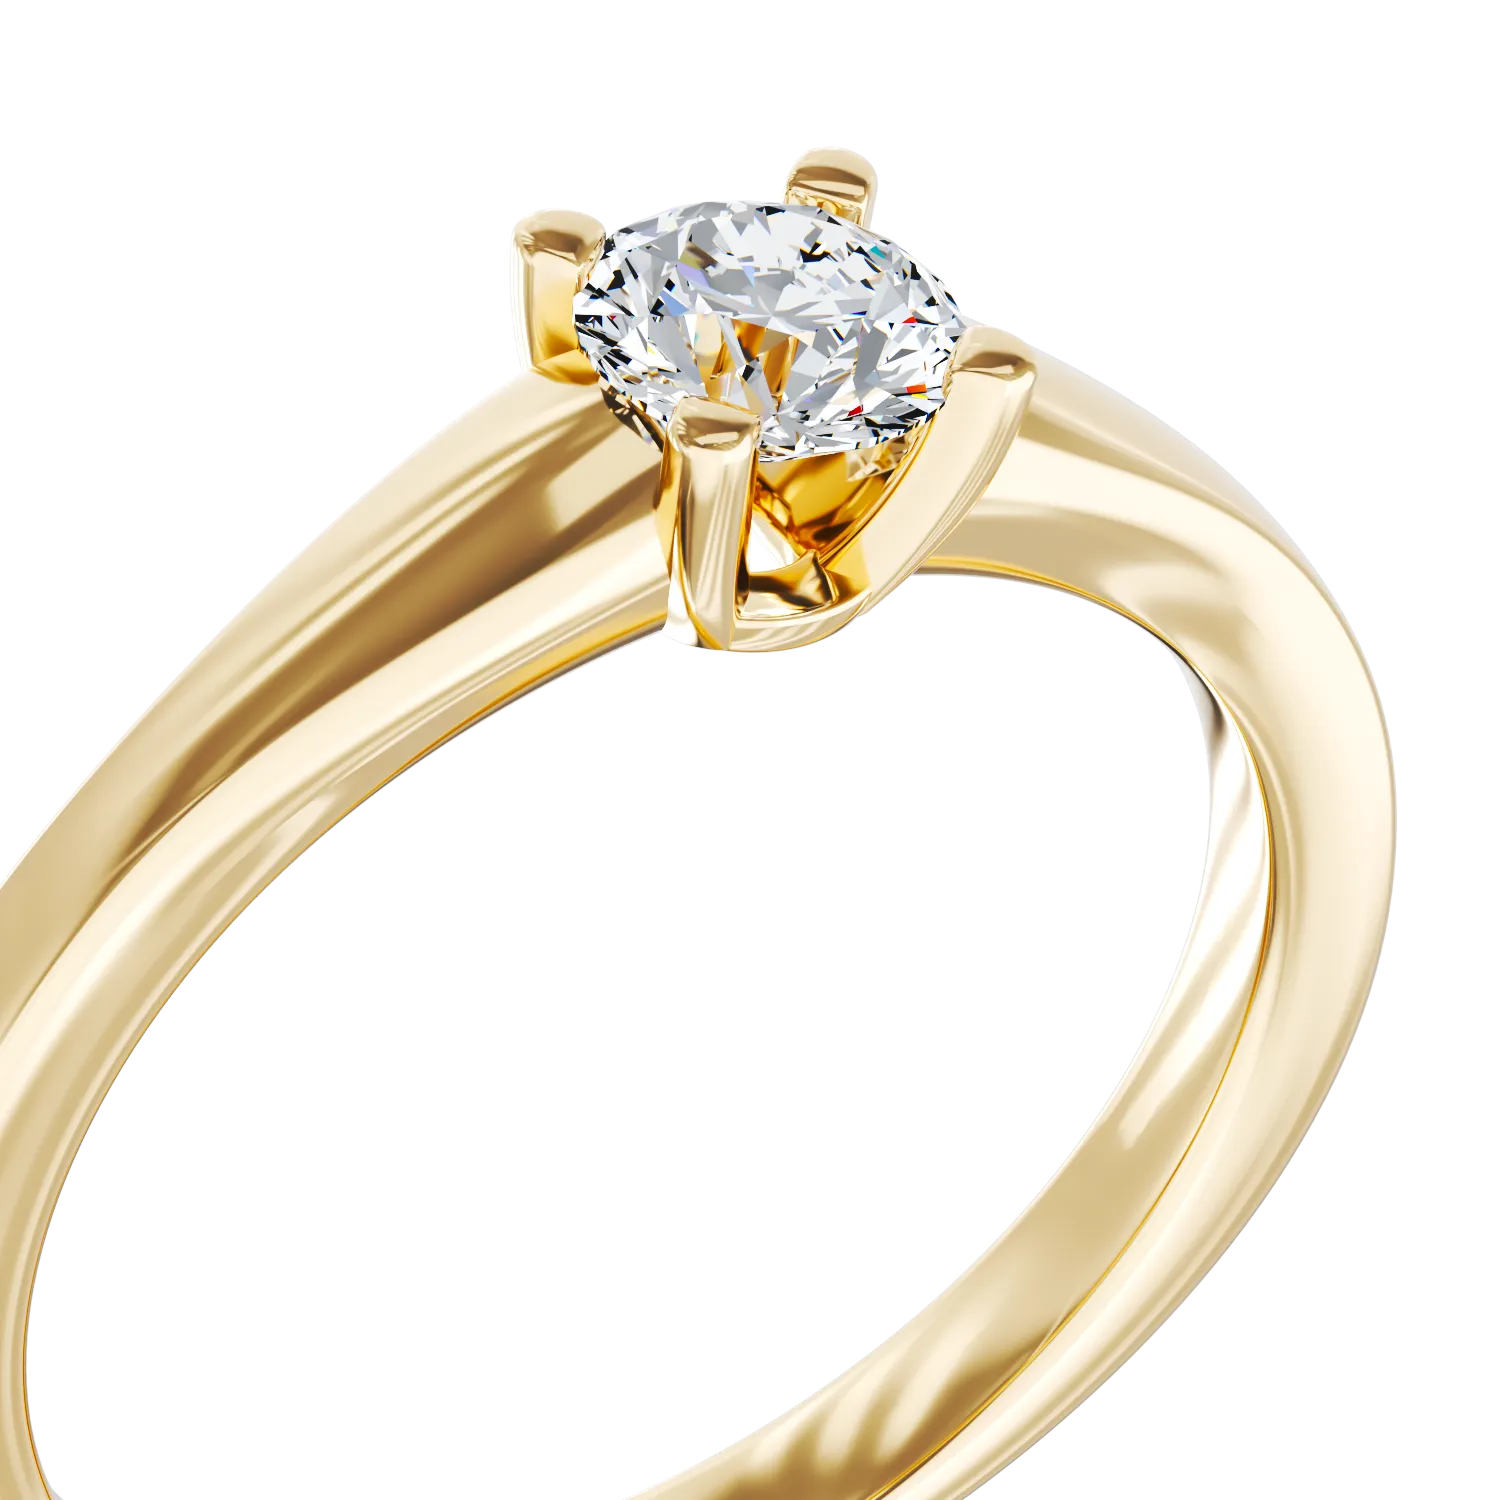 18K yellow gold engagement ring with a 0.205ct solitaire diamond